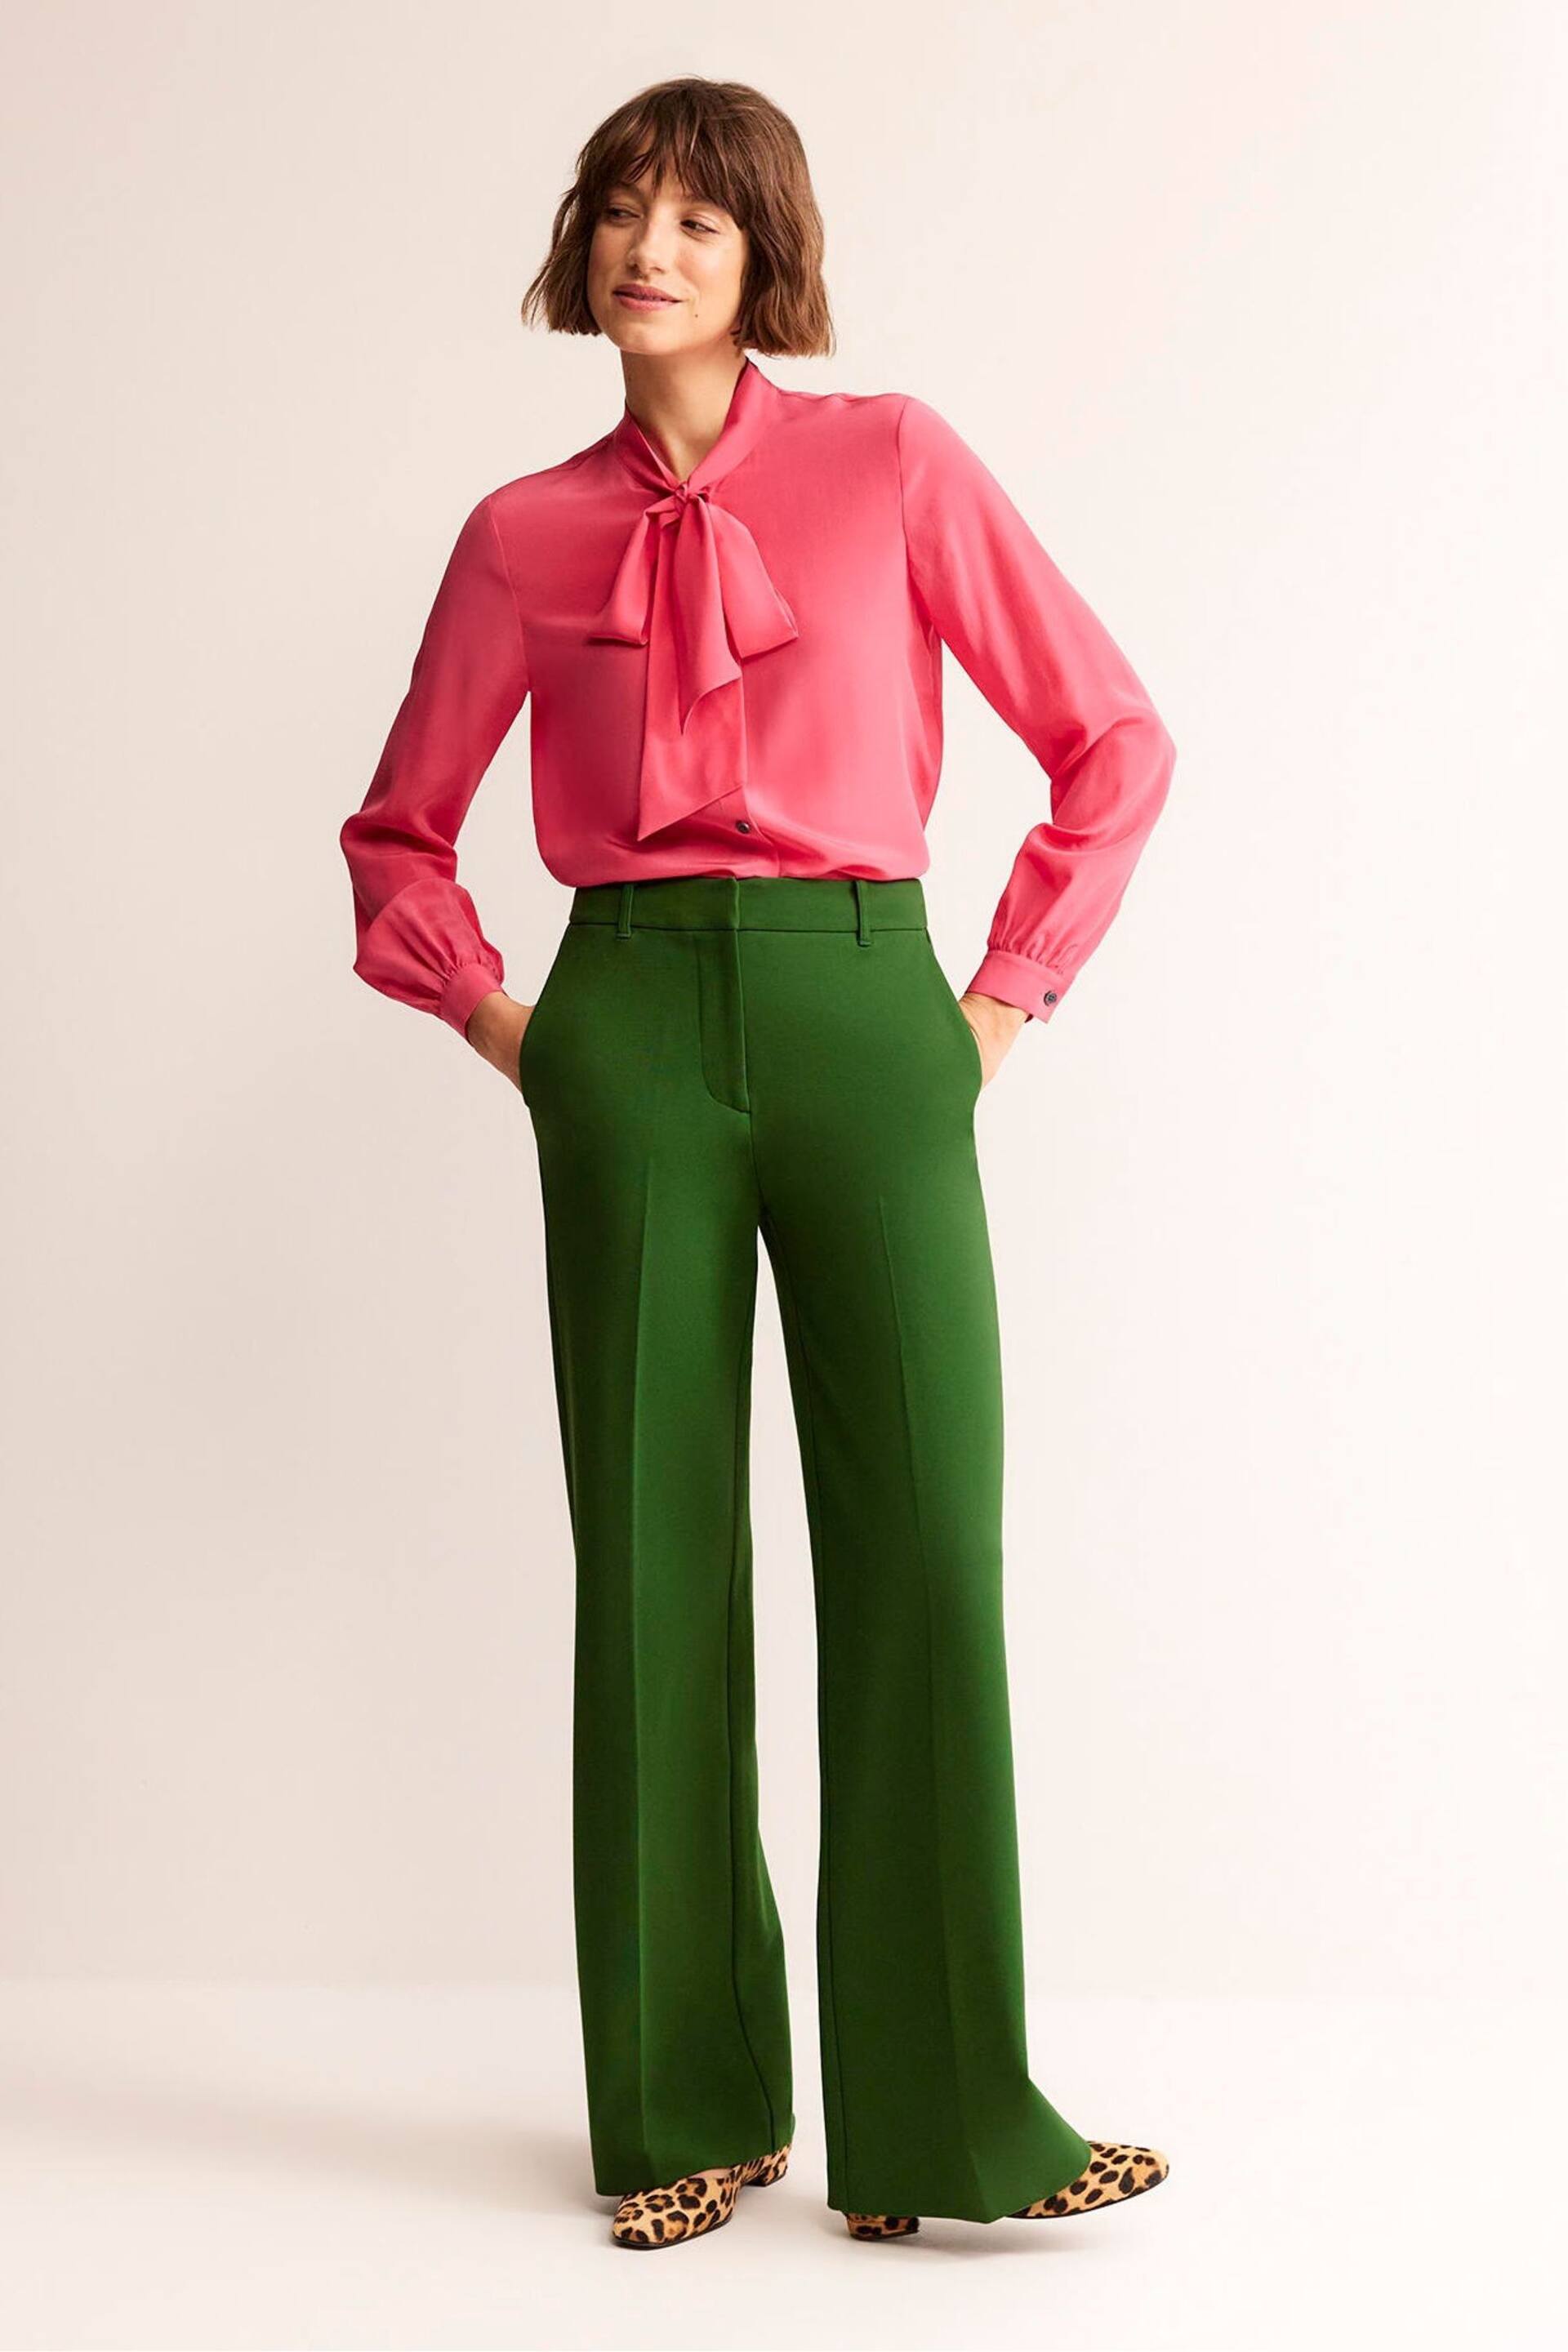 Boden Green Westbourne Ponte Trousers - Image 2 of 5